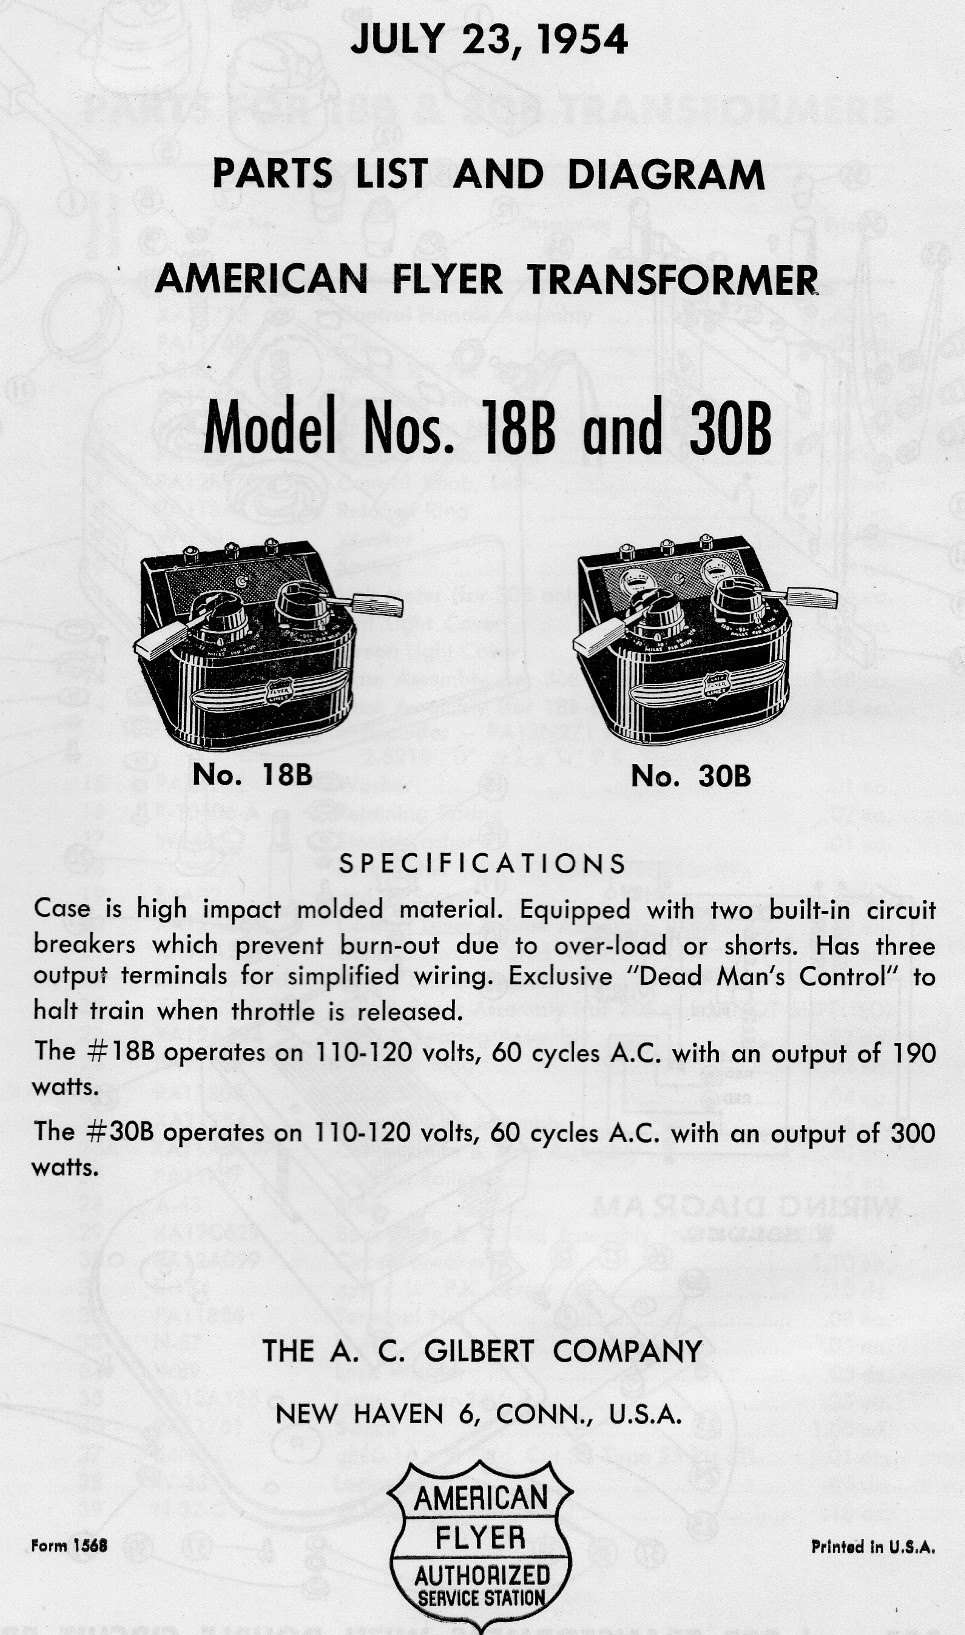 American Flyer Transformer No. 18B & 30B Parts List and Diagram - Page 1